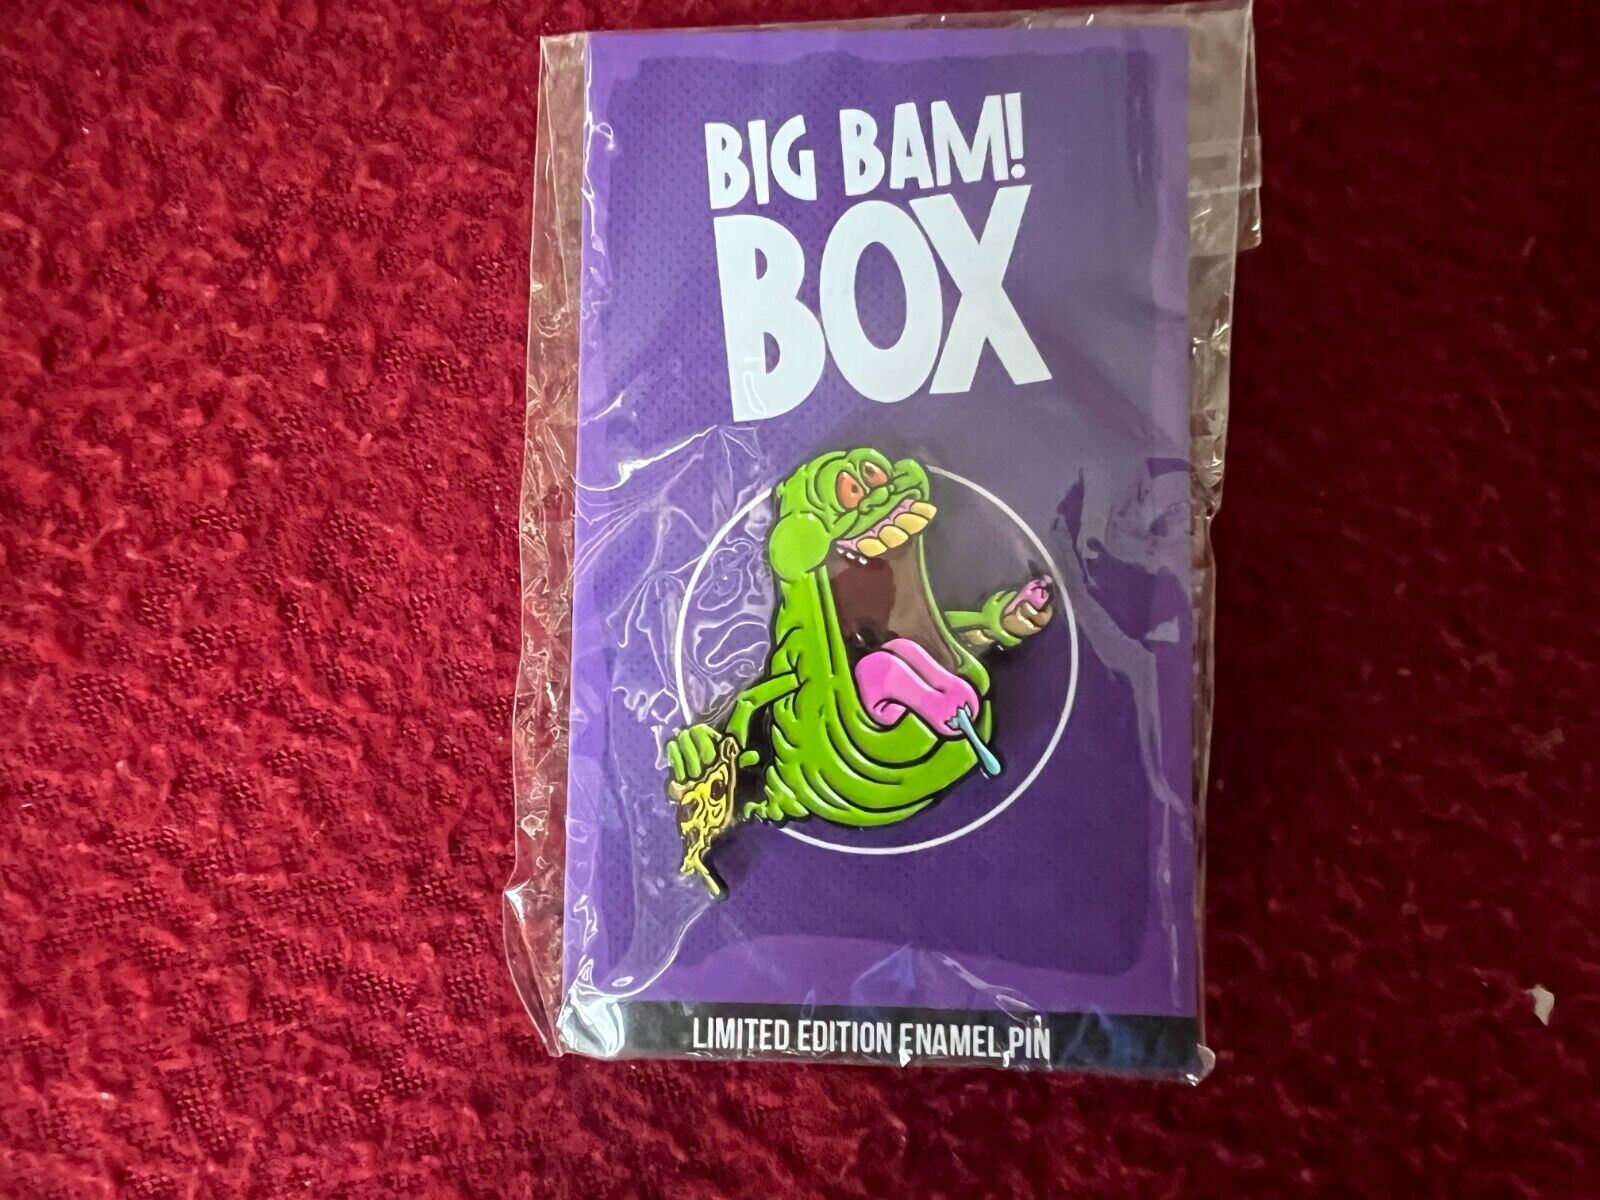 BIG BAM BOX  SLIMER THE GHOSTBUSTERS ENAMEL PIN  GREEN  VARIANT ONLY  150